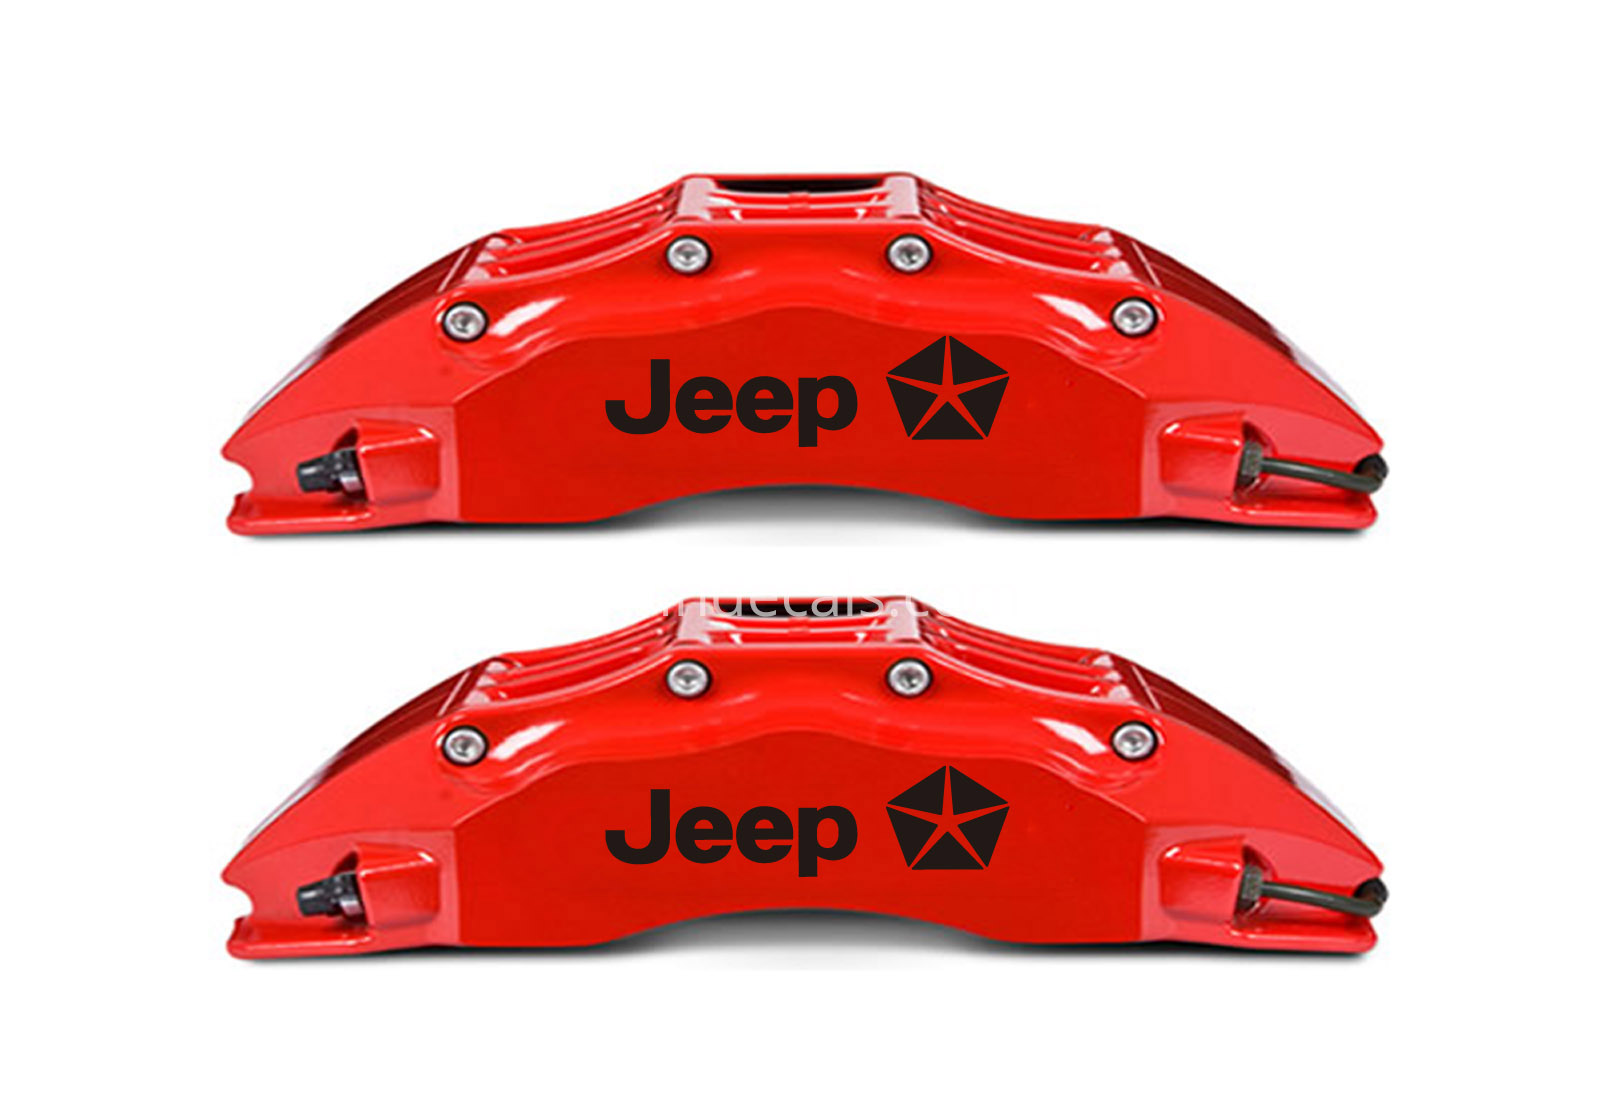 6 x Jeep Stickers for Brakes - Black